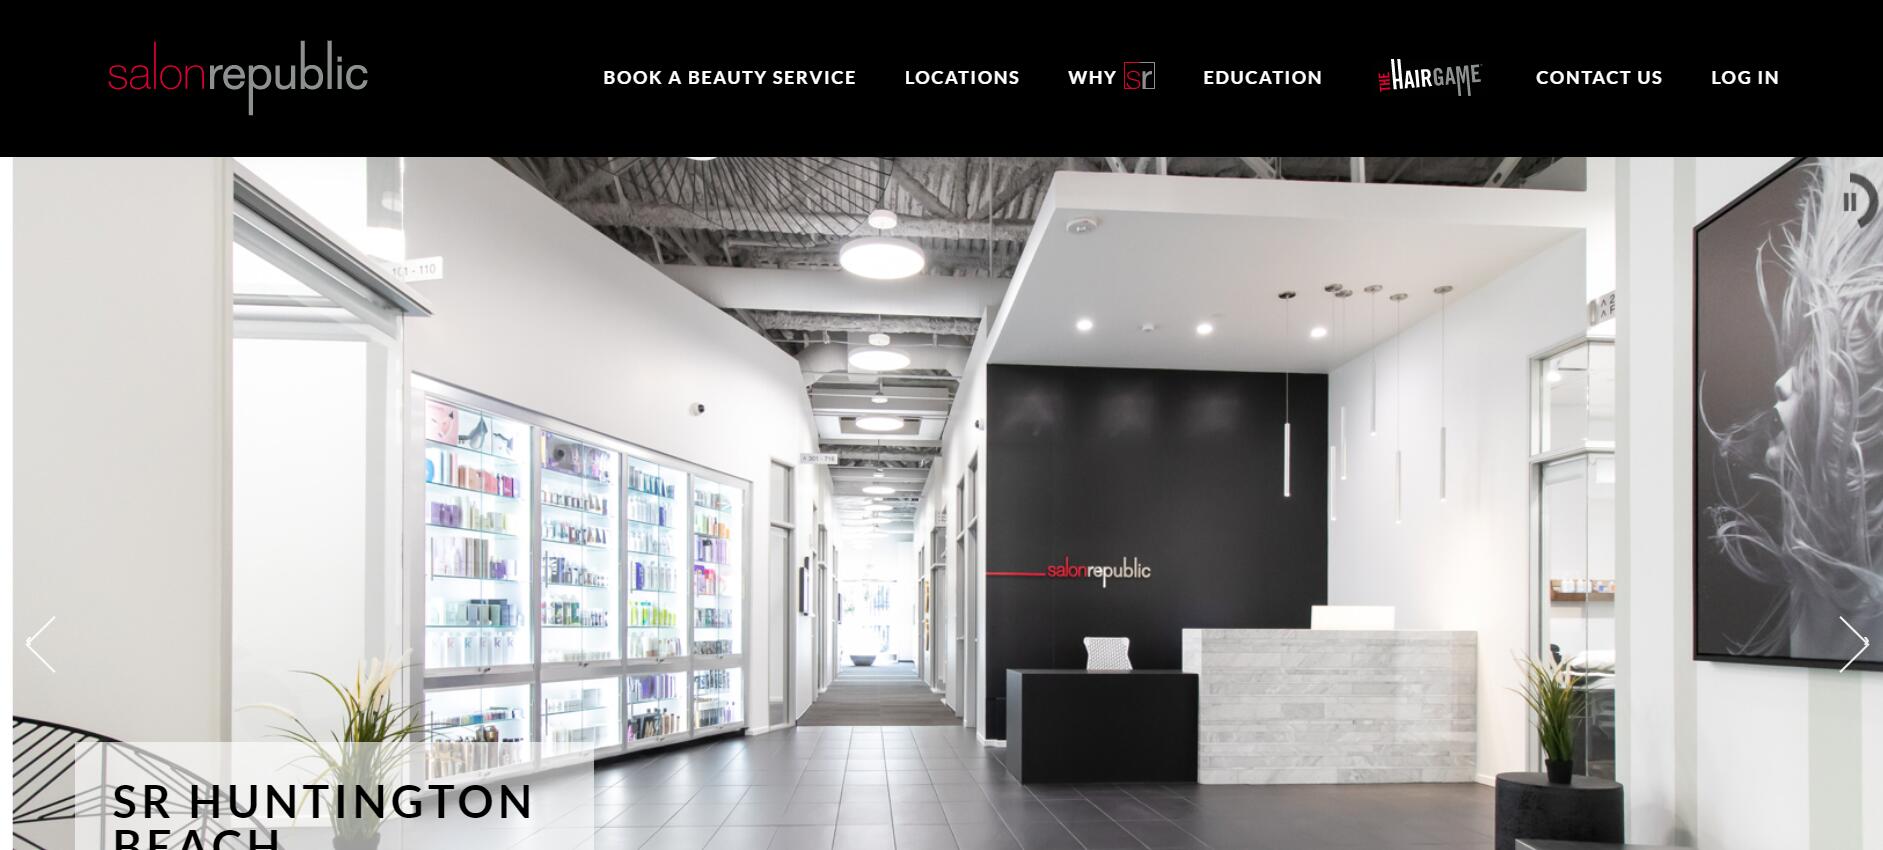 Riata Capital Group Made Investment in Salon Republic, Targeting High-End Beauty Market